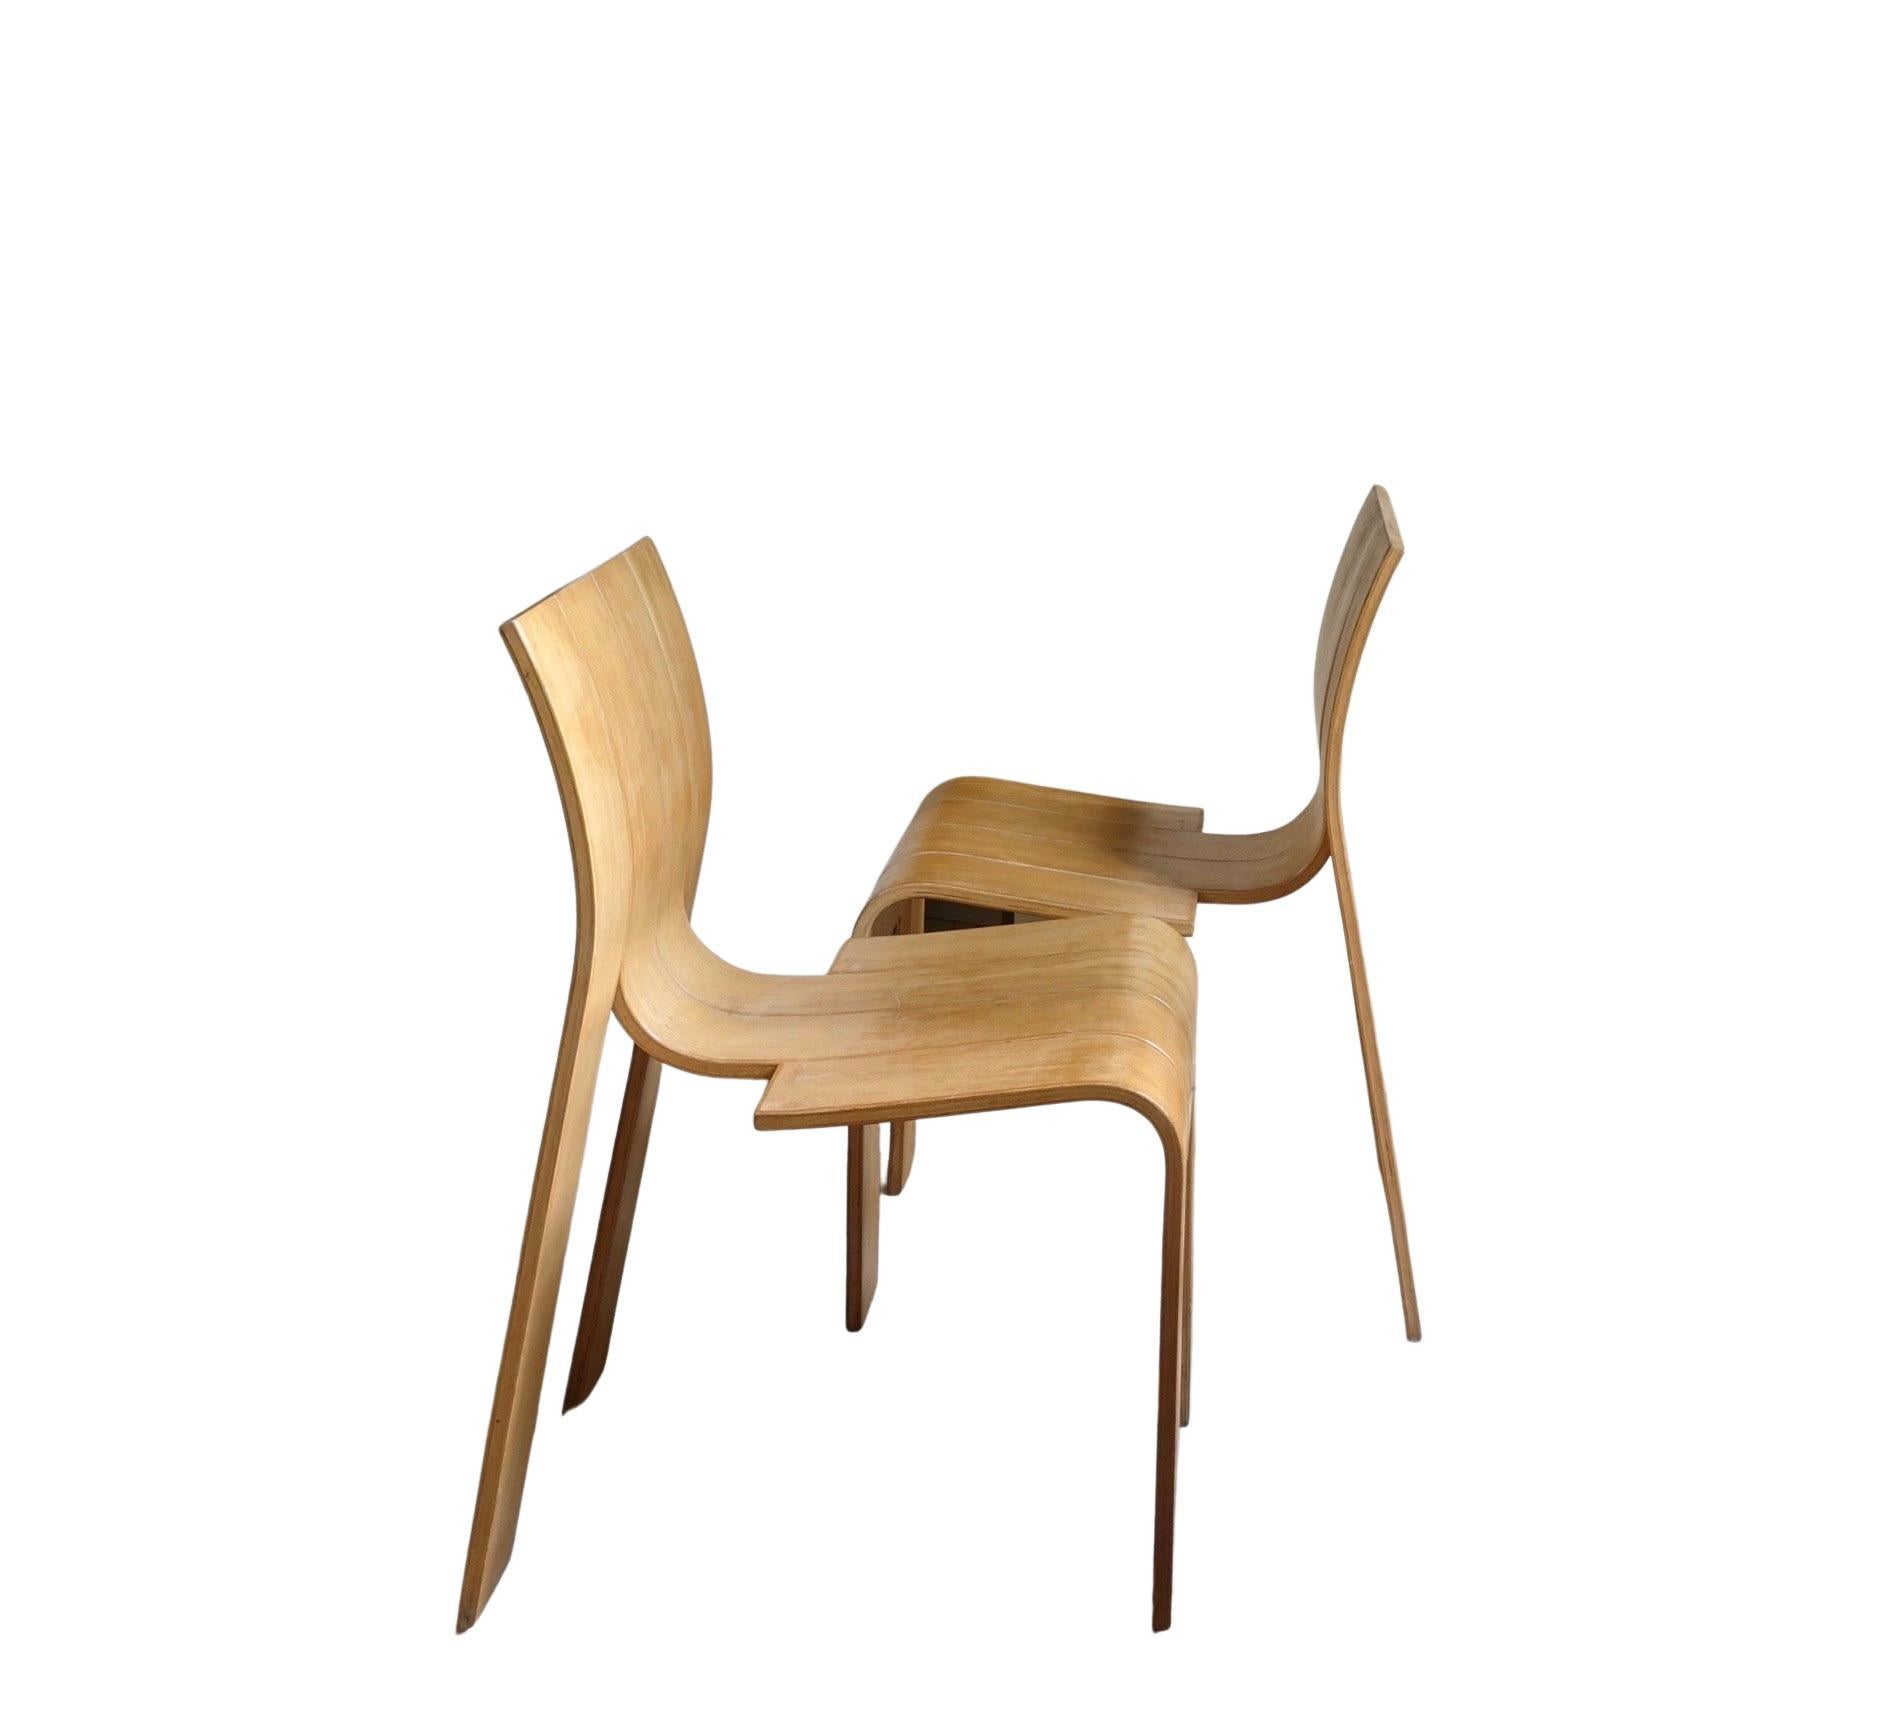 Gijs Bakker for Castelijn
Set of two Strip chairs 
Netherland, around 1970

Set of two ''Strip'' wood dining chairs, the Netherlands, 1974
The chairs are made of four strips of pressure moulded laminated beech wood linked by dowels.
The curved